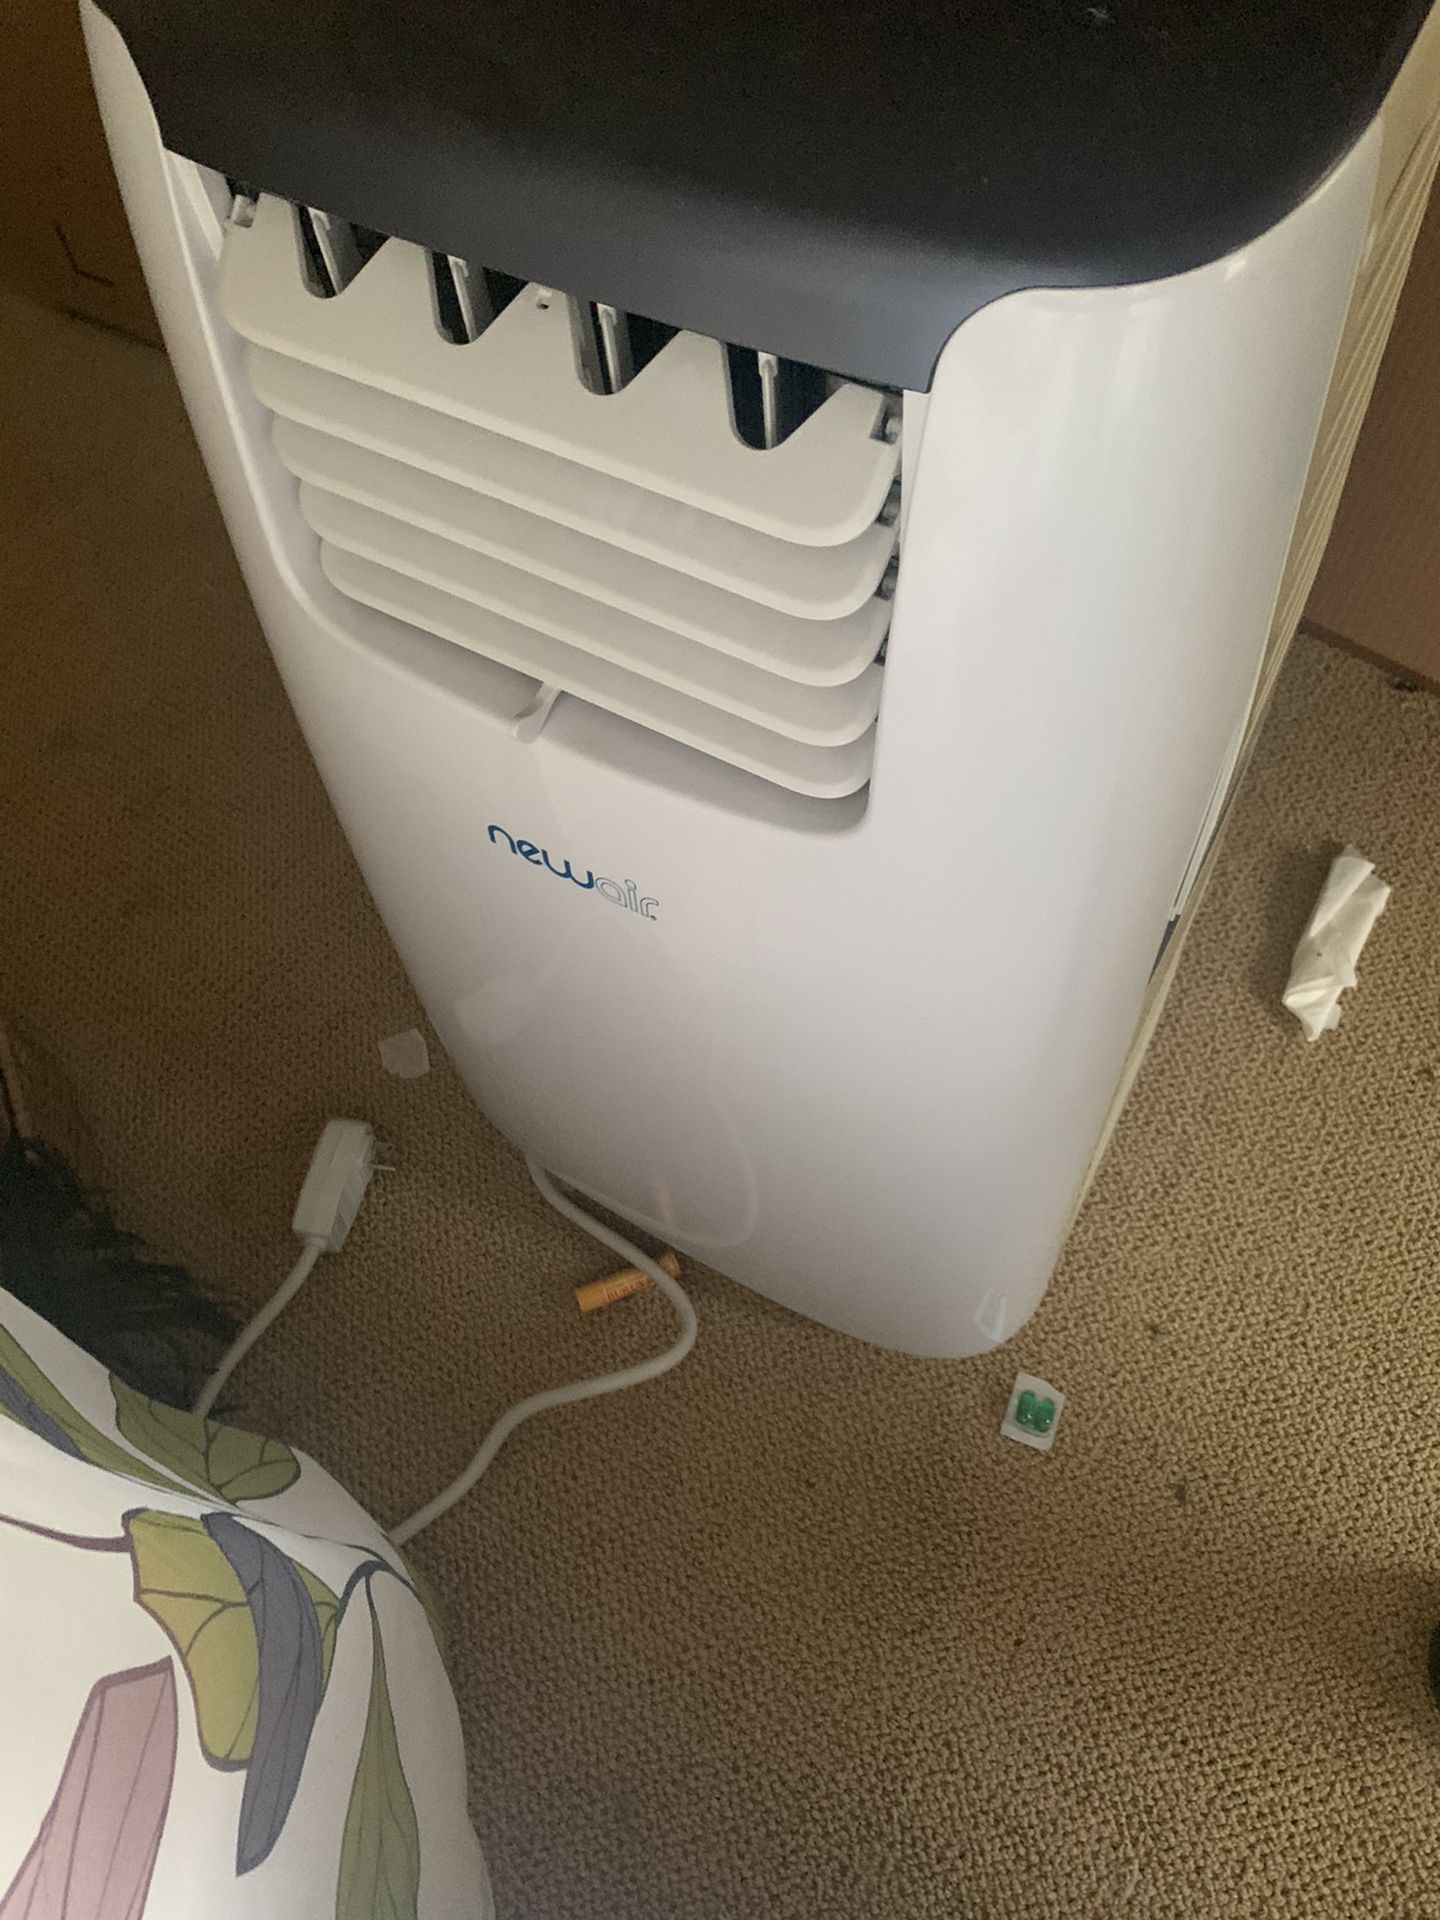 Newair portable air conditioner and fan - AC-14100 - perfect condition - MOVING MUST SELL